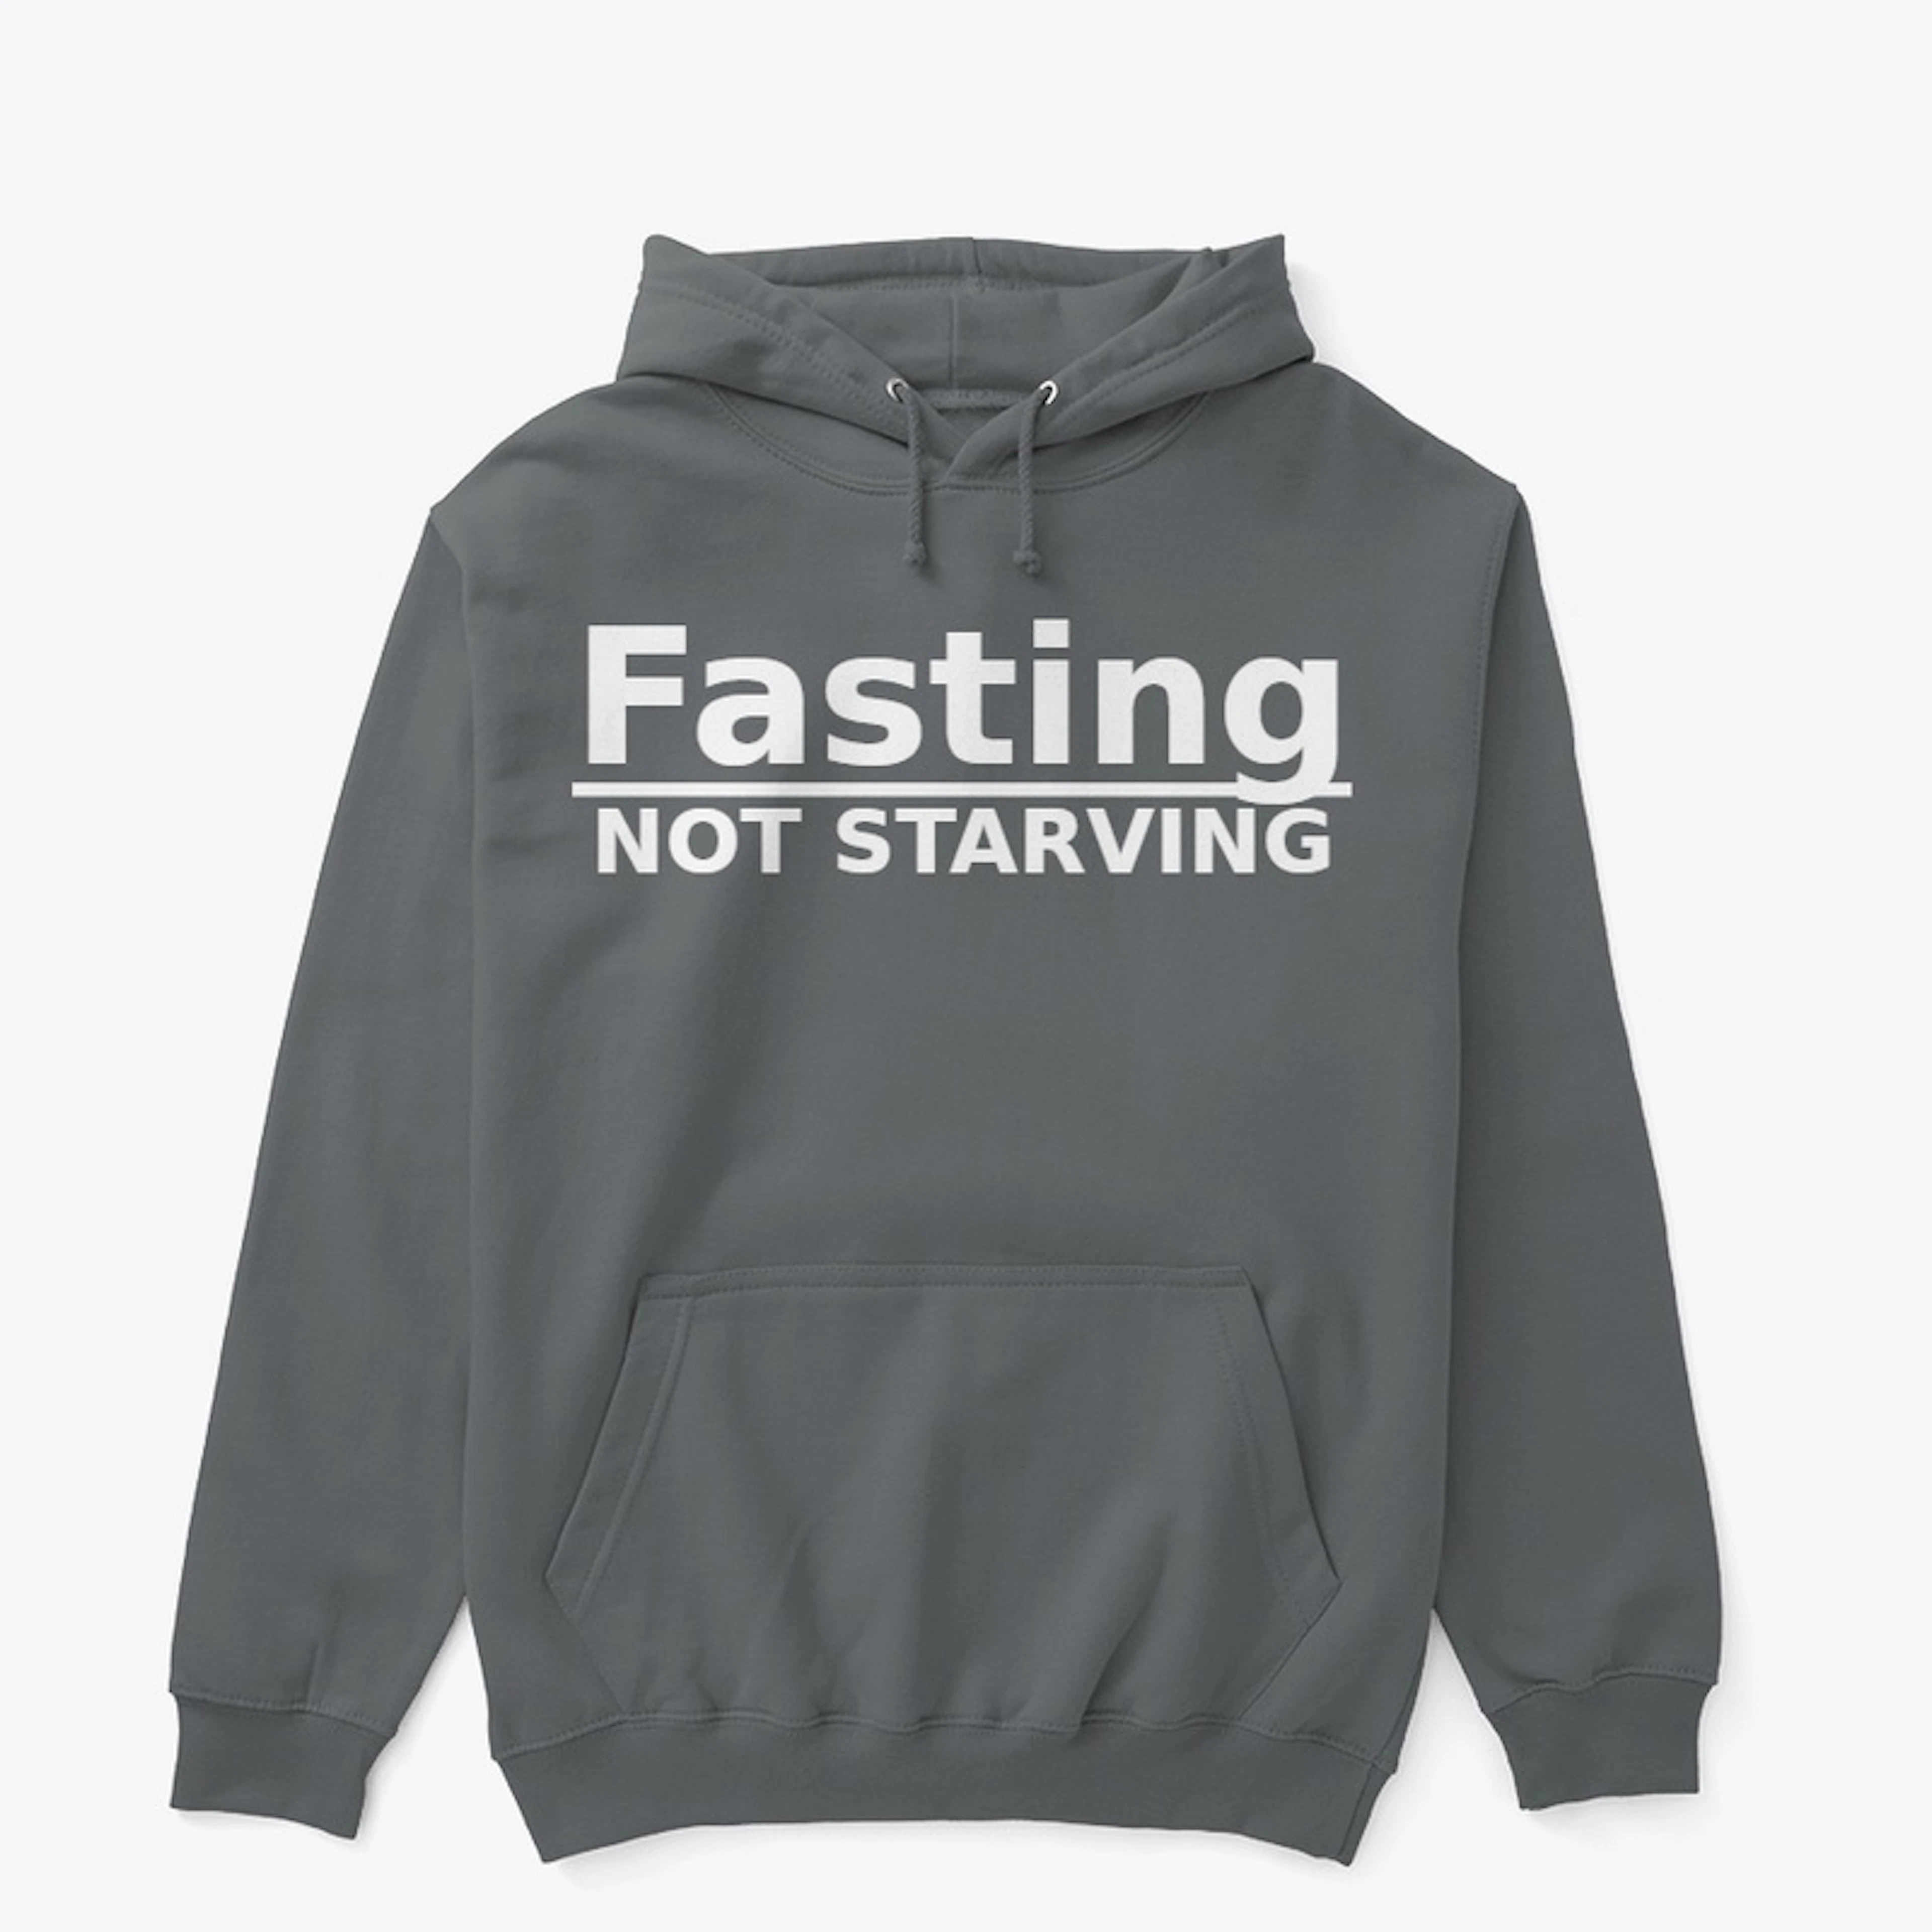 Fasting NOT Starving